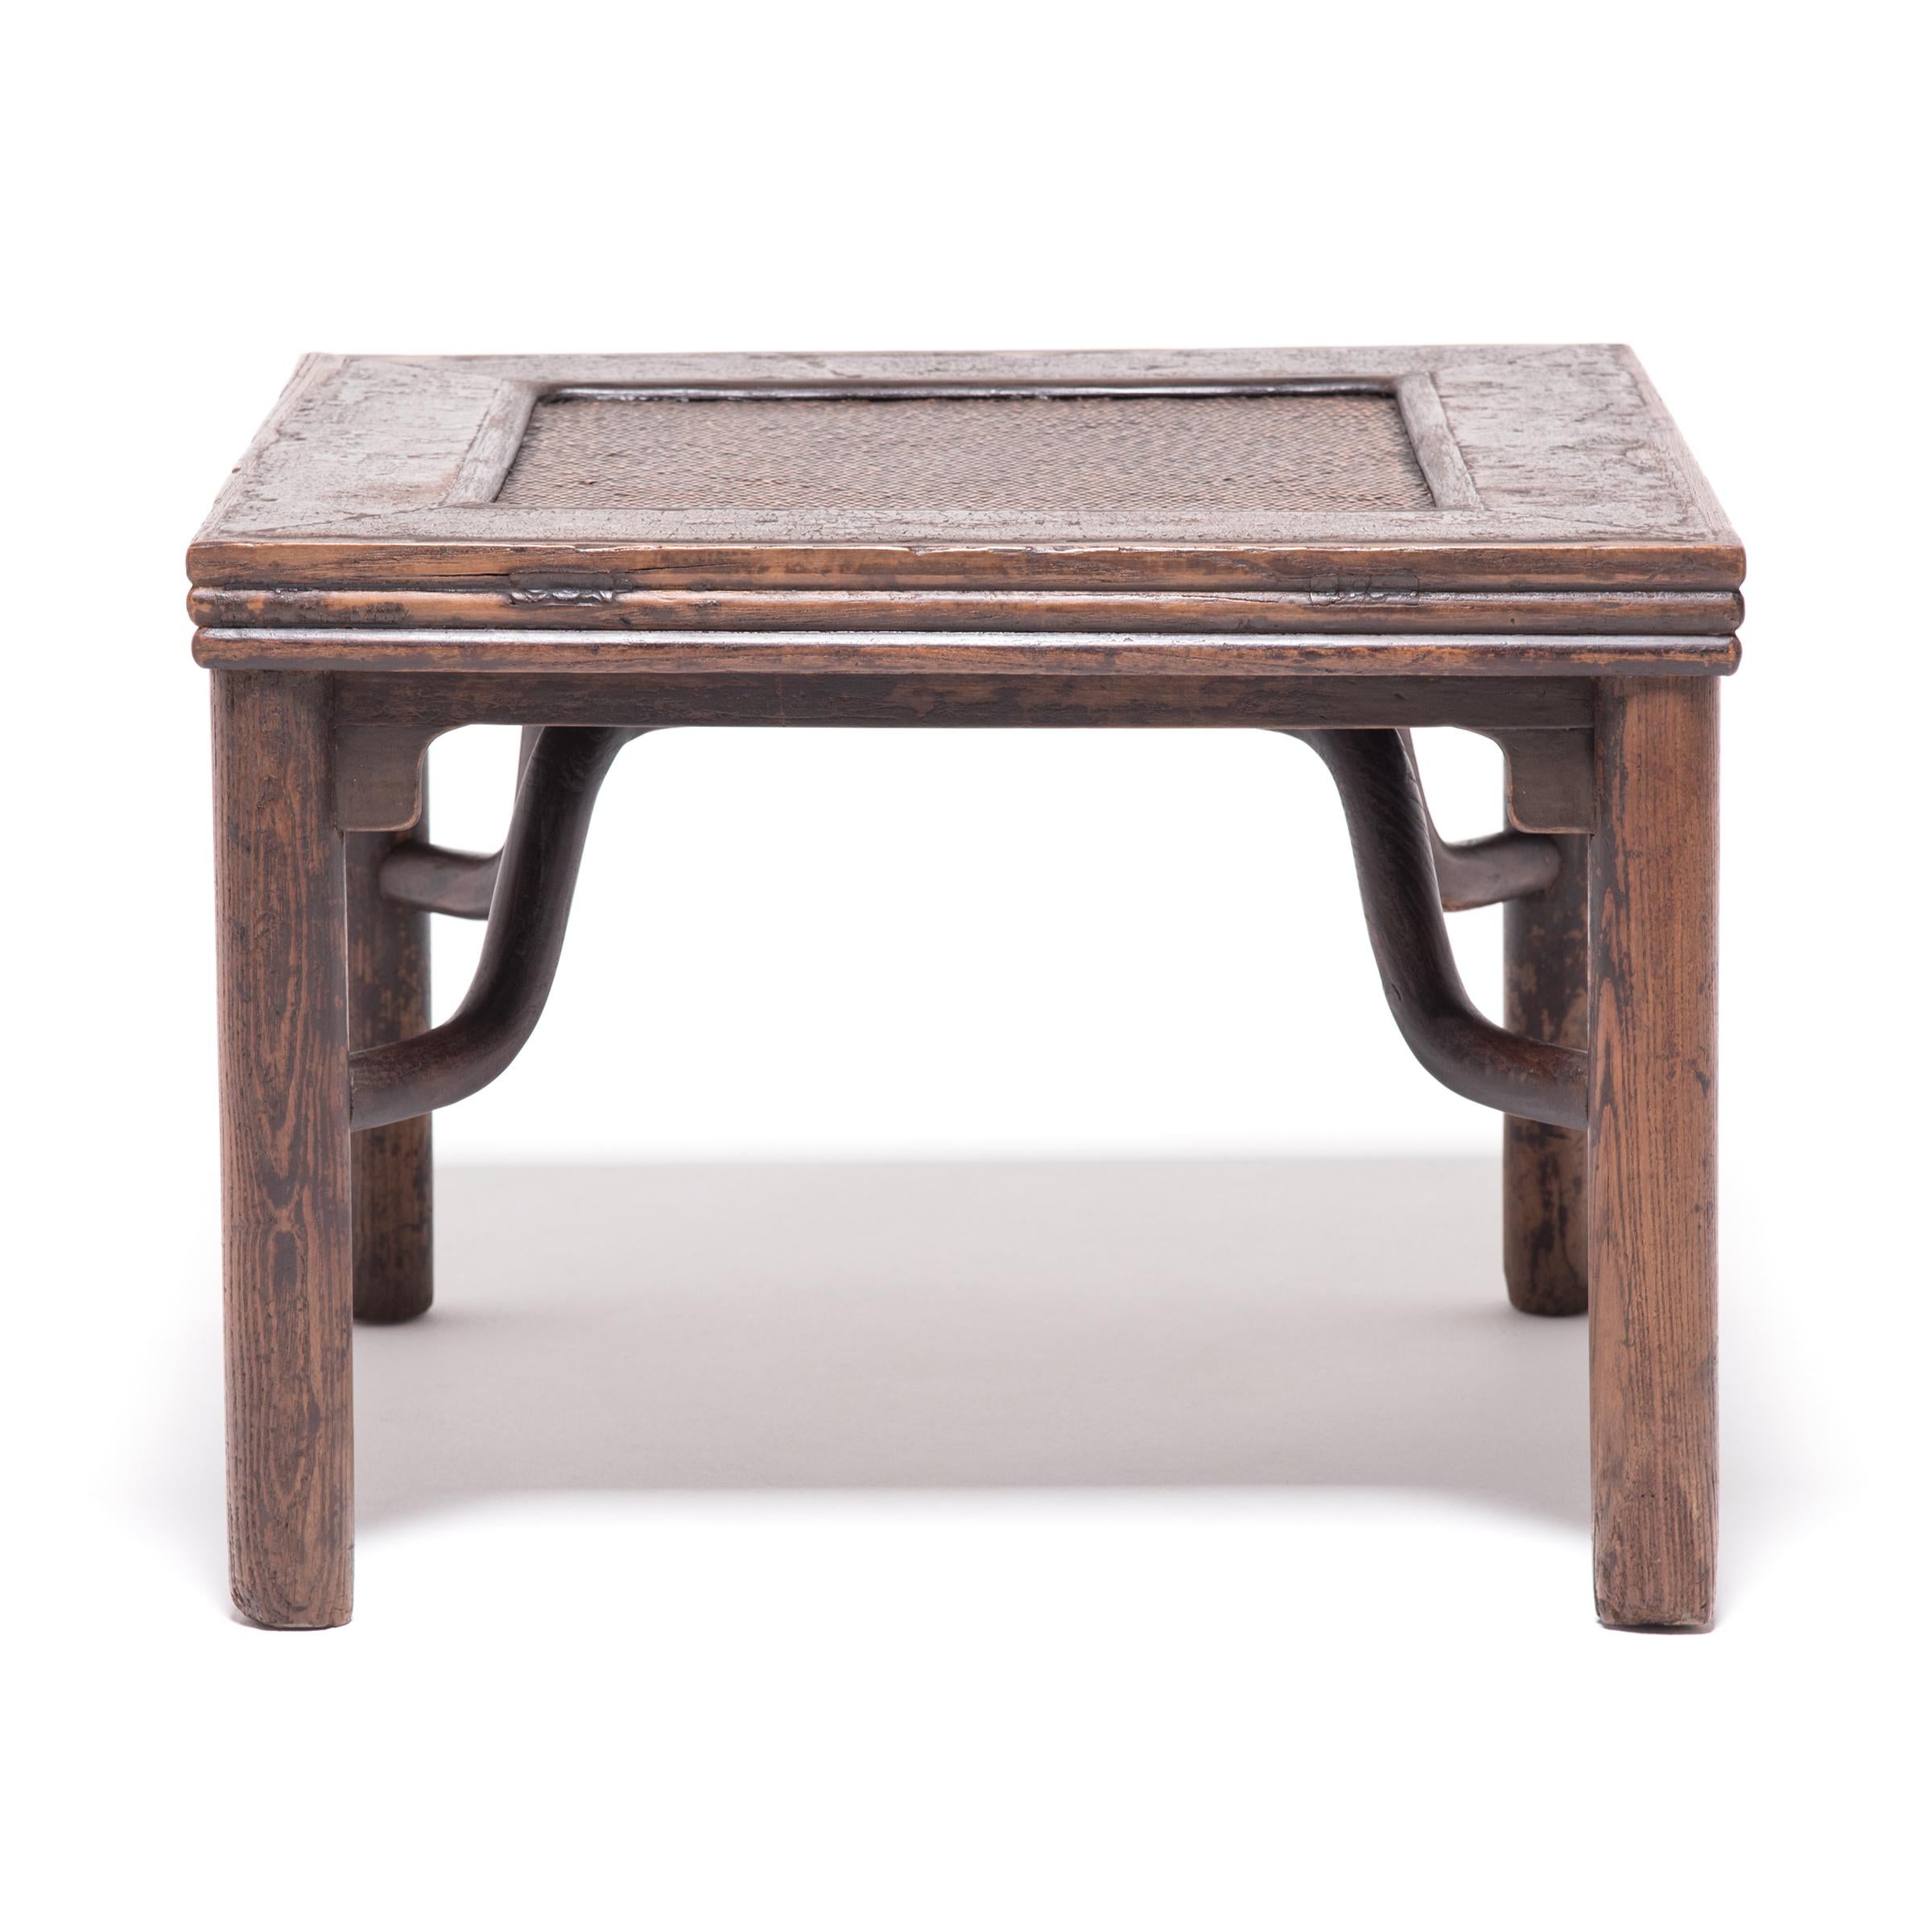 Qing Chinese Woven Top Fang Deng Stool, c. 1900 For Sale